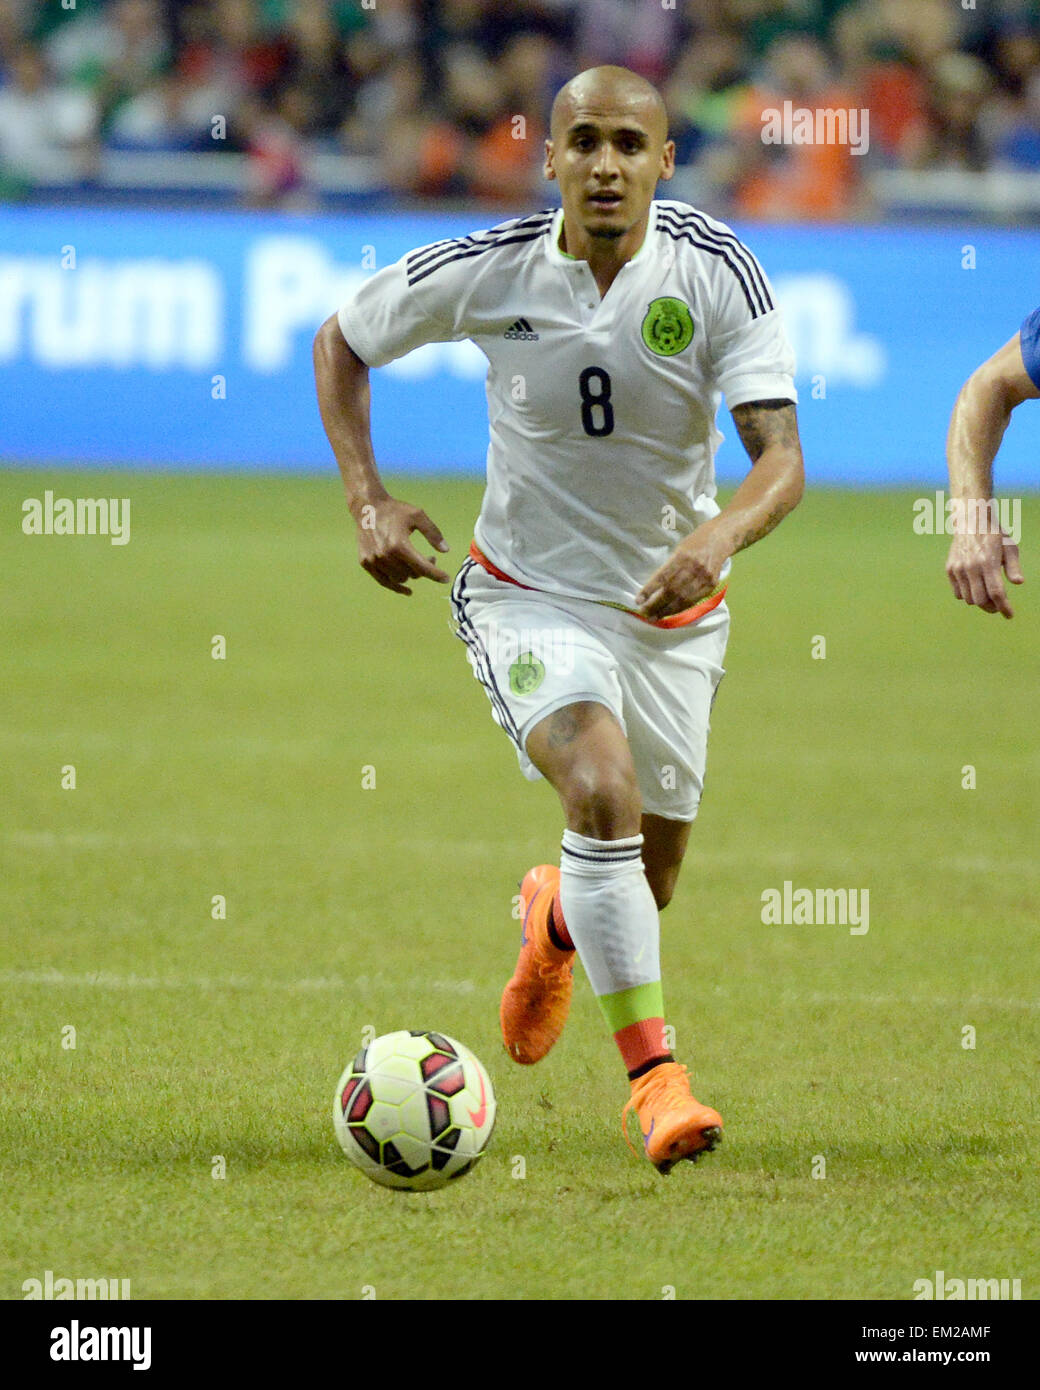 April 15, 2015. Marco Fabian #8 of Mexico in action vs the USA soccer team at the Alamodome in an International Friendly in San Antonio Texas. The U.S. defeats Mexico 2 - 0. Stock Photo